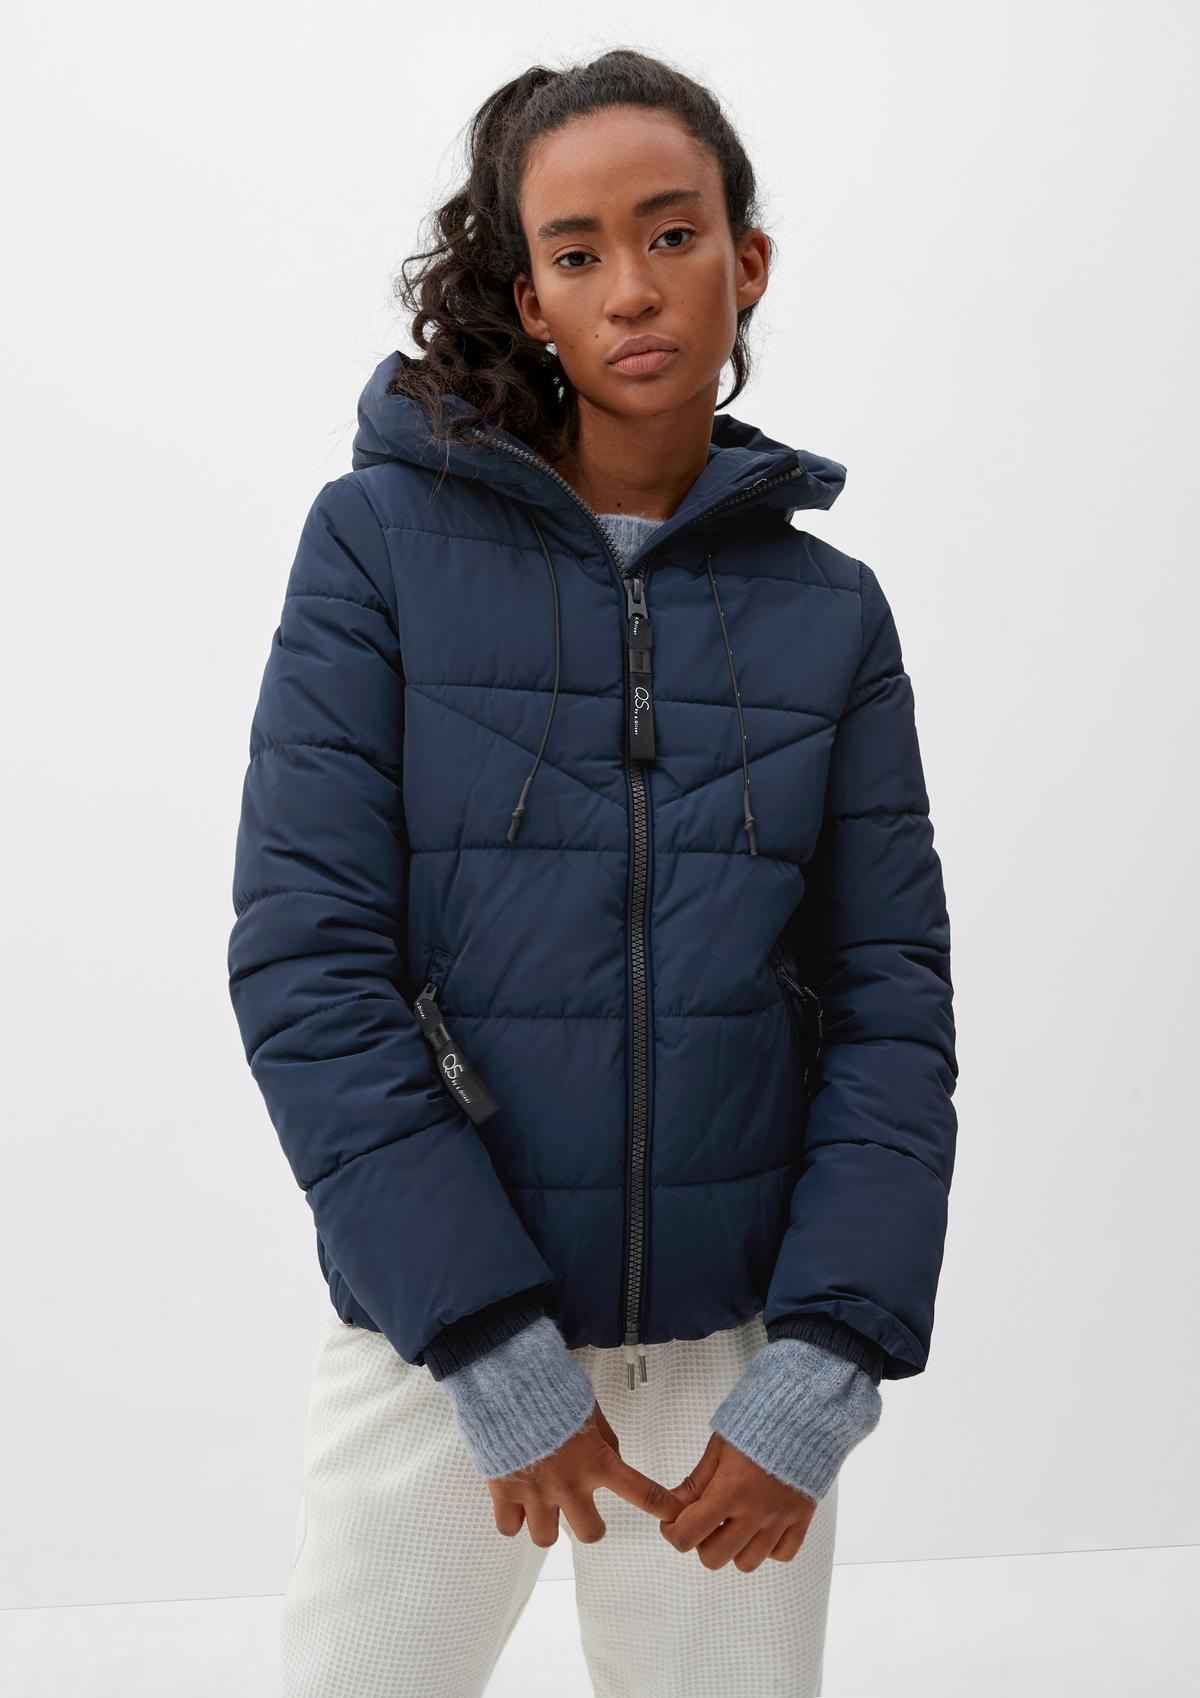 hood rose jacket Quilted with a -